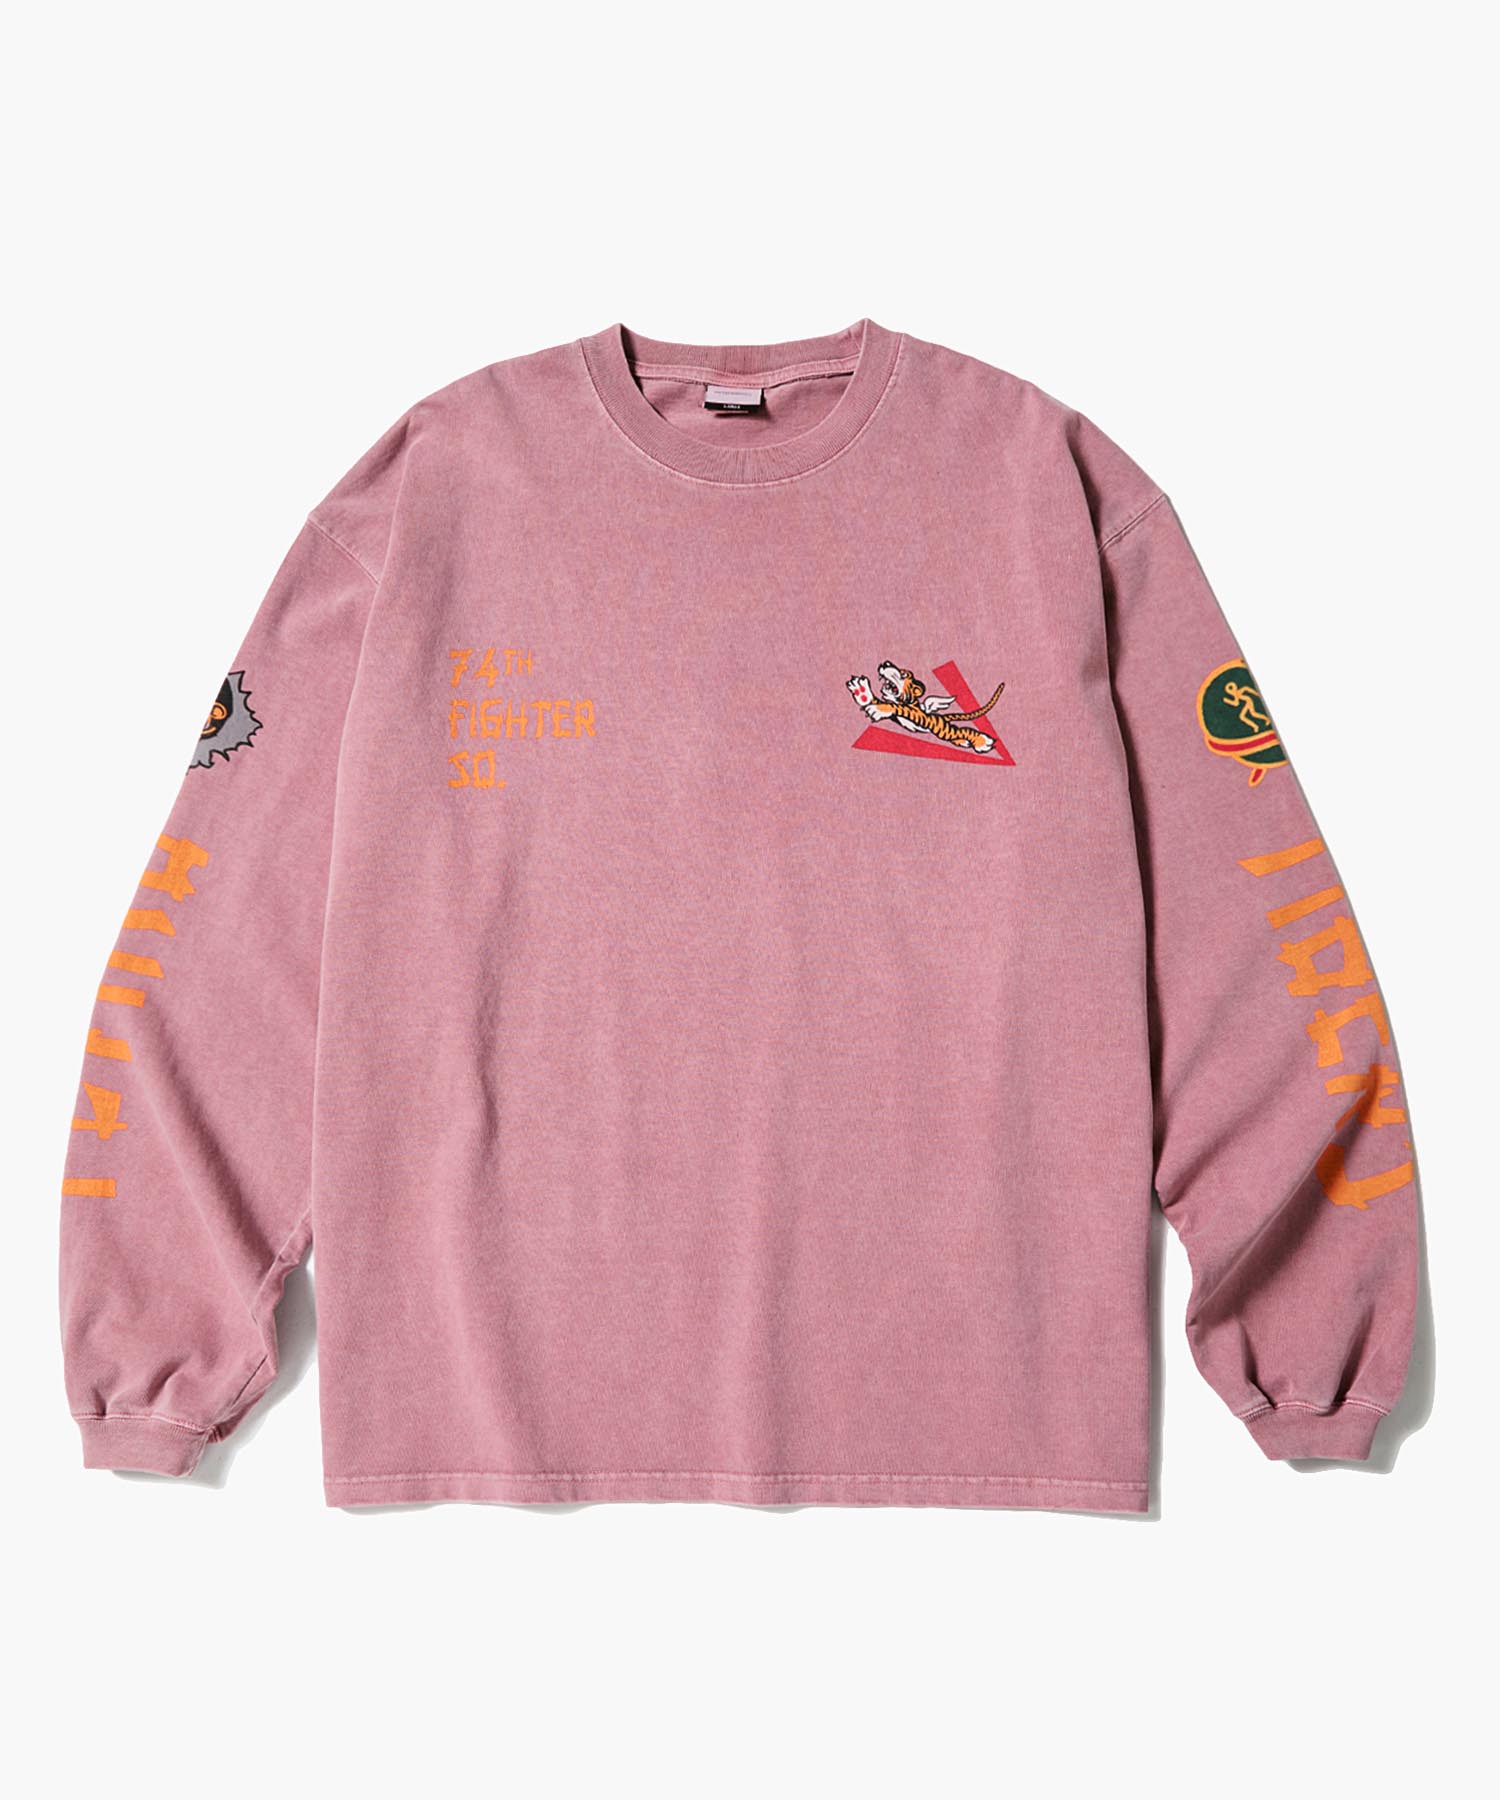 MIL SERIES LONG SLEEVE(74TH FIGHTER SQ)_PIGMENT PINK